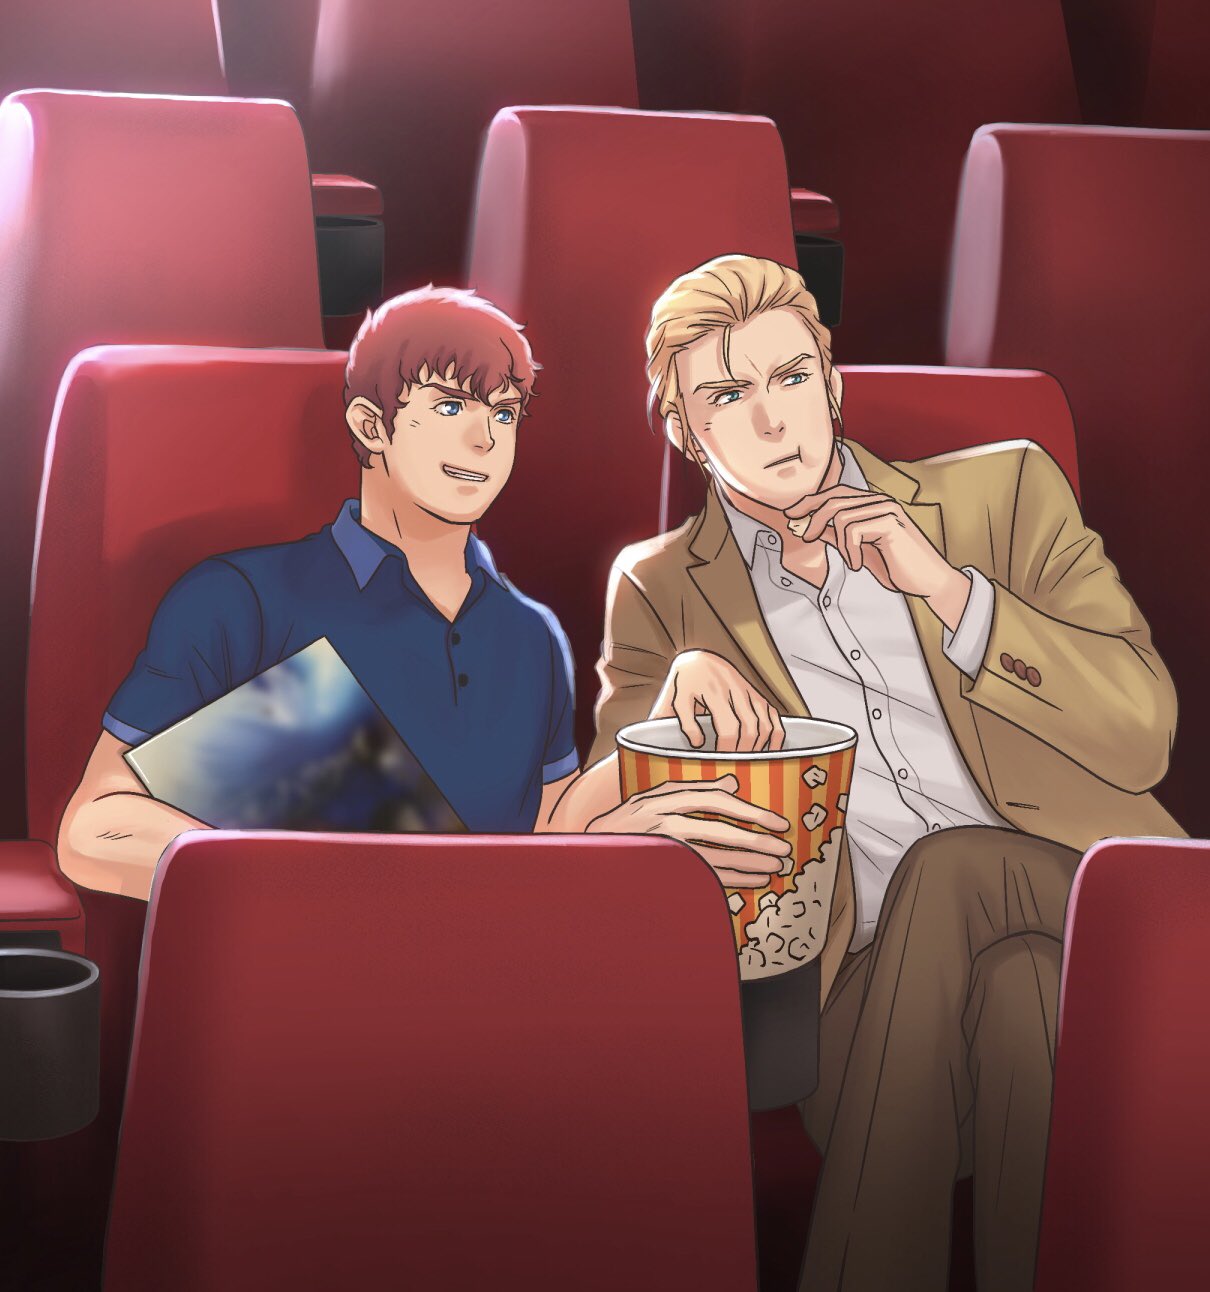 2boys amuro_ray blonde_hair blue_eyes blue_shirt blurry brown_hair brown_pants buttons char's_counterattack char_aznable crossed_legs curly_hair eating food grin gundam gundam_hathaway's_flash hair_slicked_back highres jacket light_rays movie_poster movie_theater multiple_boys pants parody polo_shirt popcorn rie_asap sharing_food shirt smile white_shirt yellow_jacket